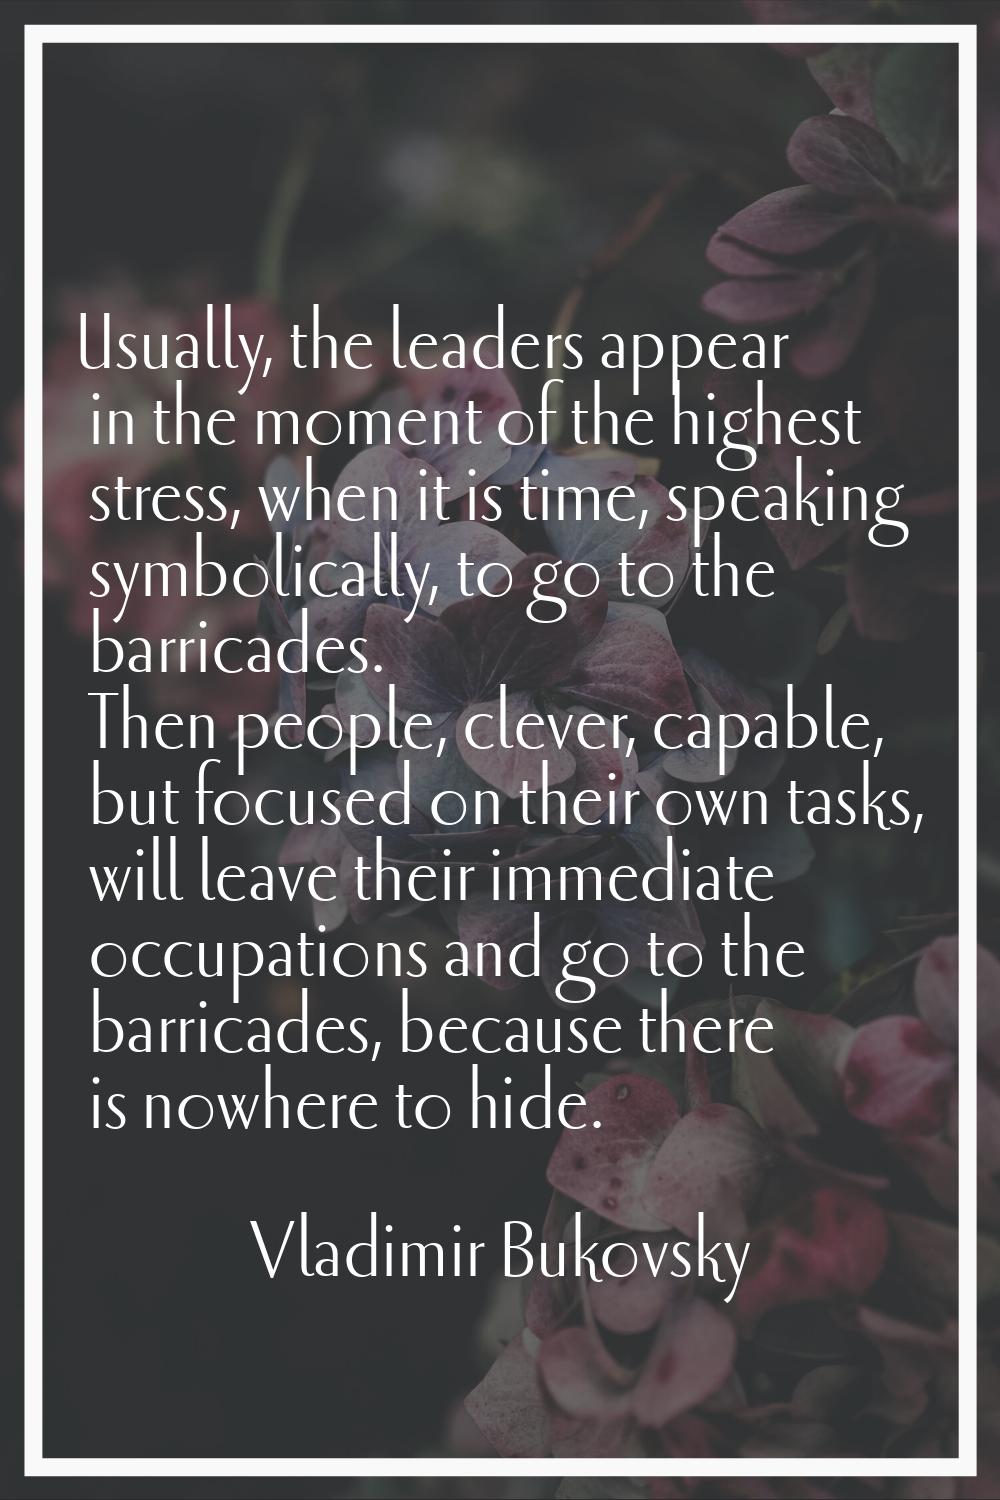 Usually, the leaders appear in the moment of the highest stress, when it is time, speaking symbolic